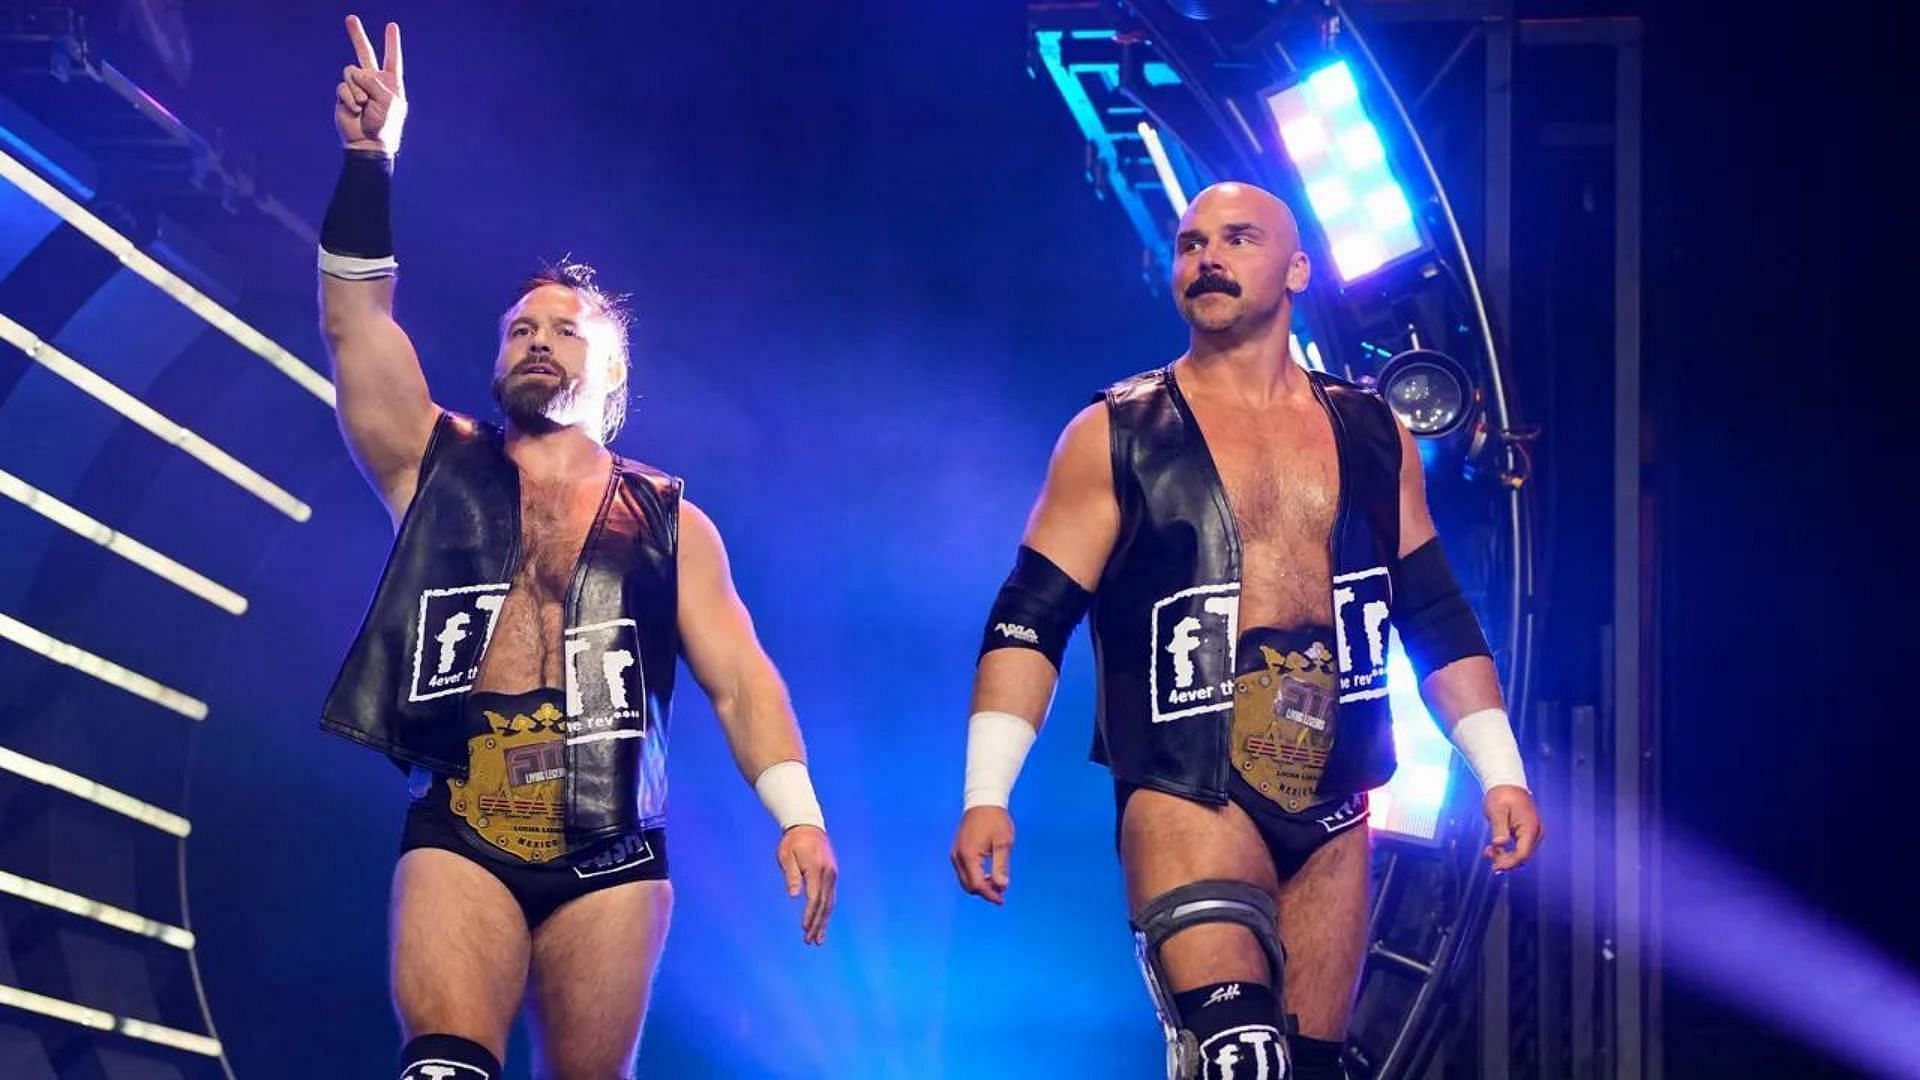 FTR are the AEW tag team champions